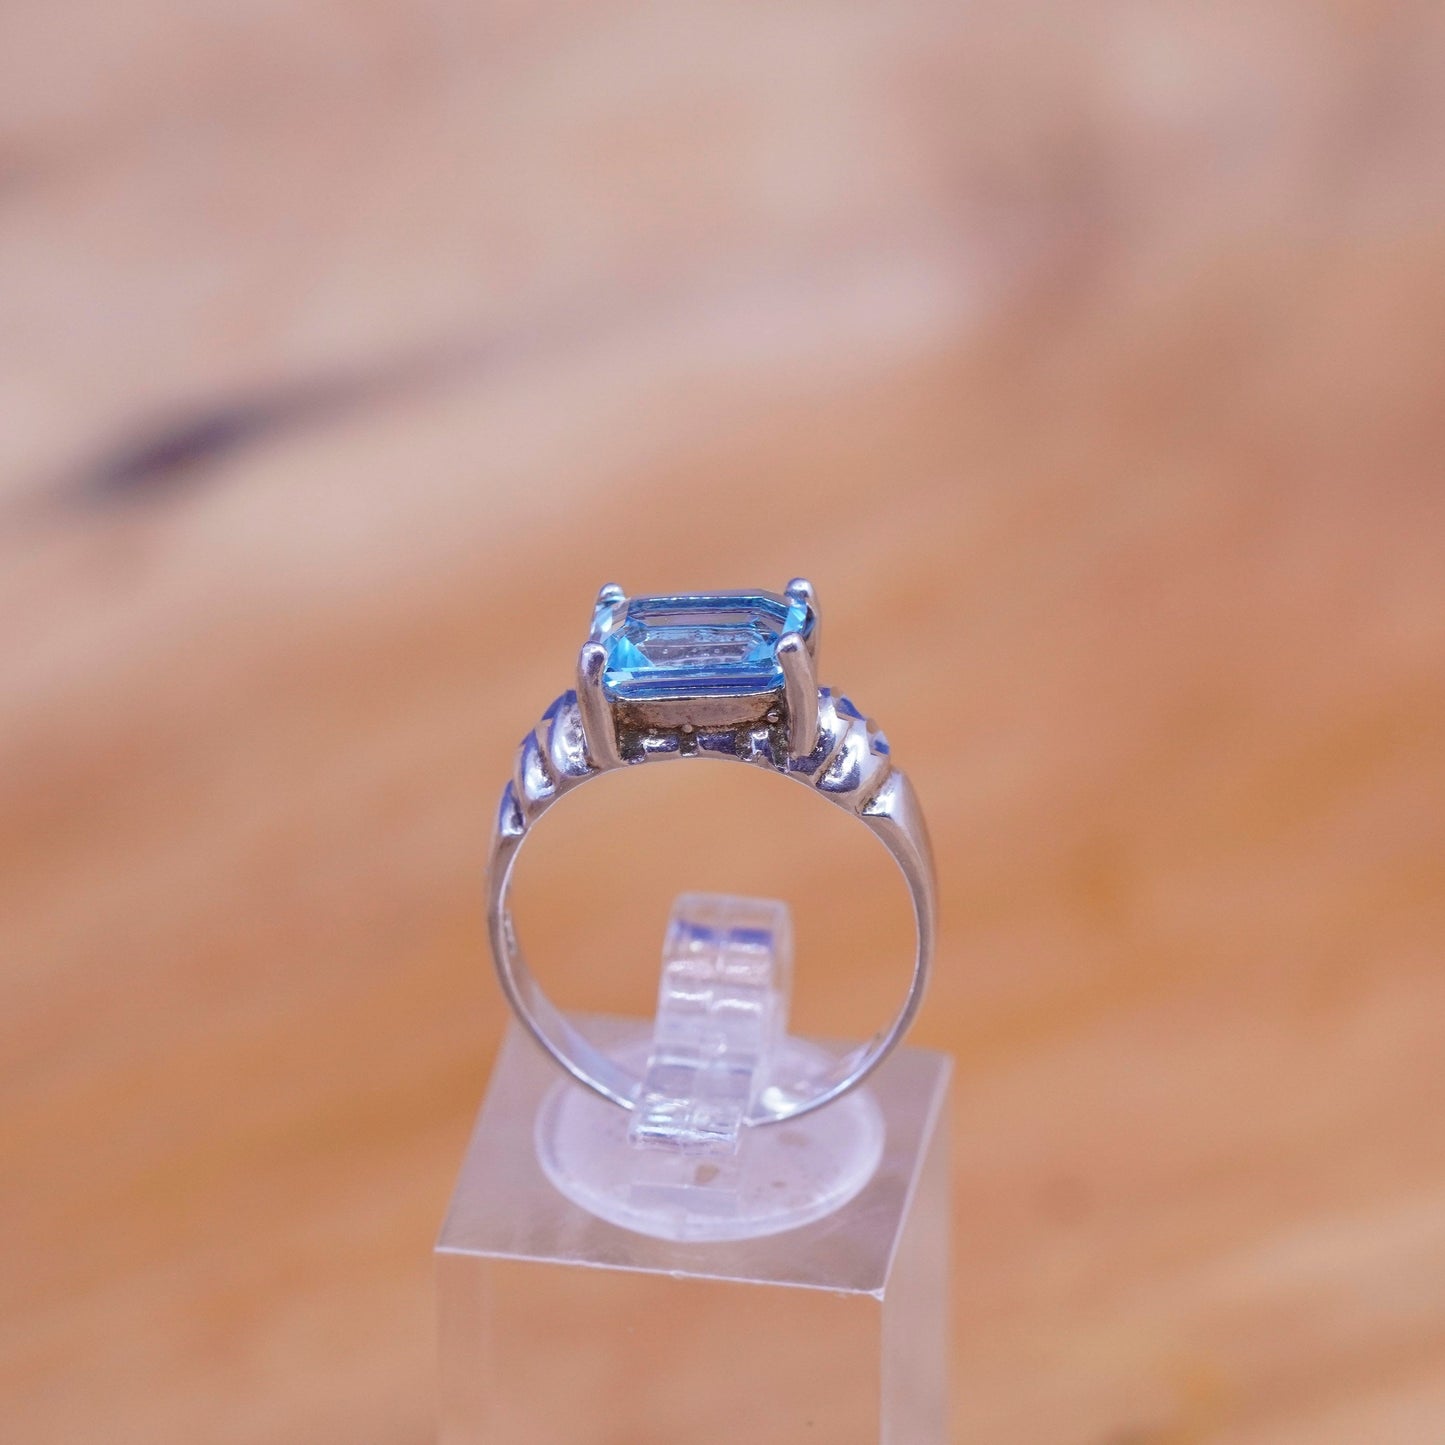 Size 8, vintage Sterling 925 silver handmade ring with blue topaz